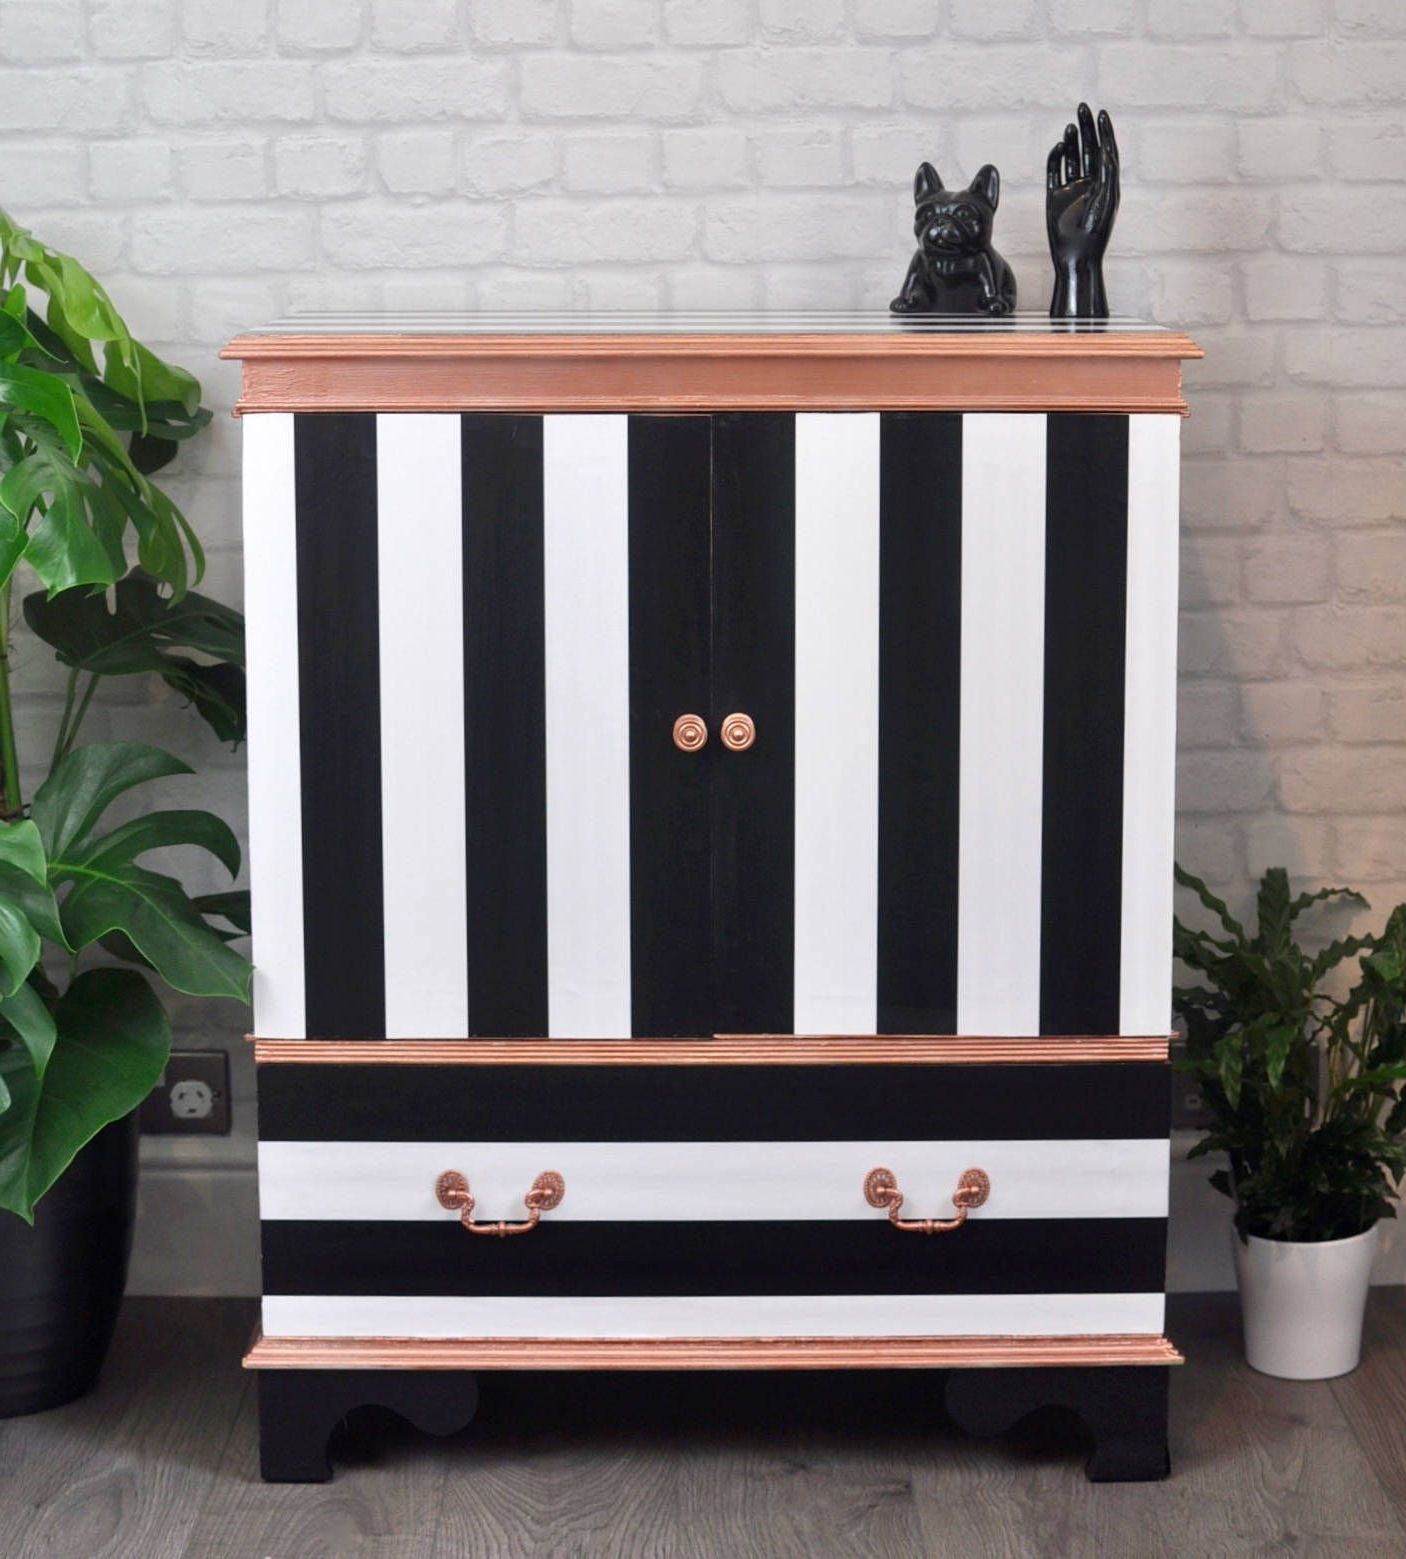 Latest Gold Tv Cabinets Regarding Upcycled Retro Vintage Tv Cabinet In Black & White Stripe, Rose Gold (View 8 of 20)